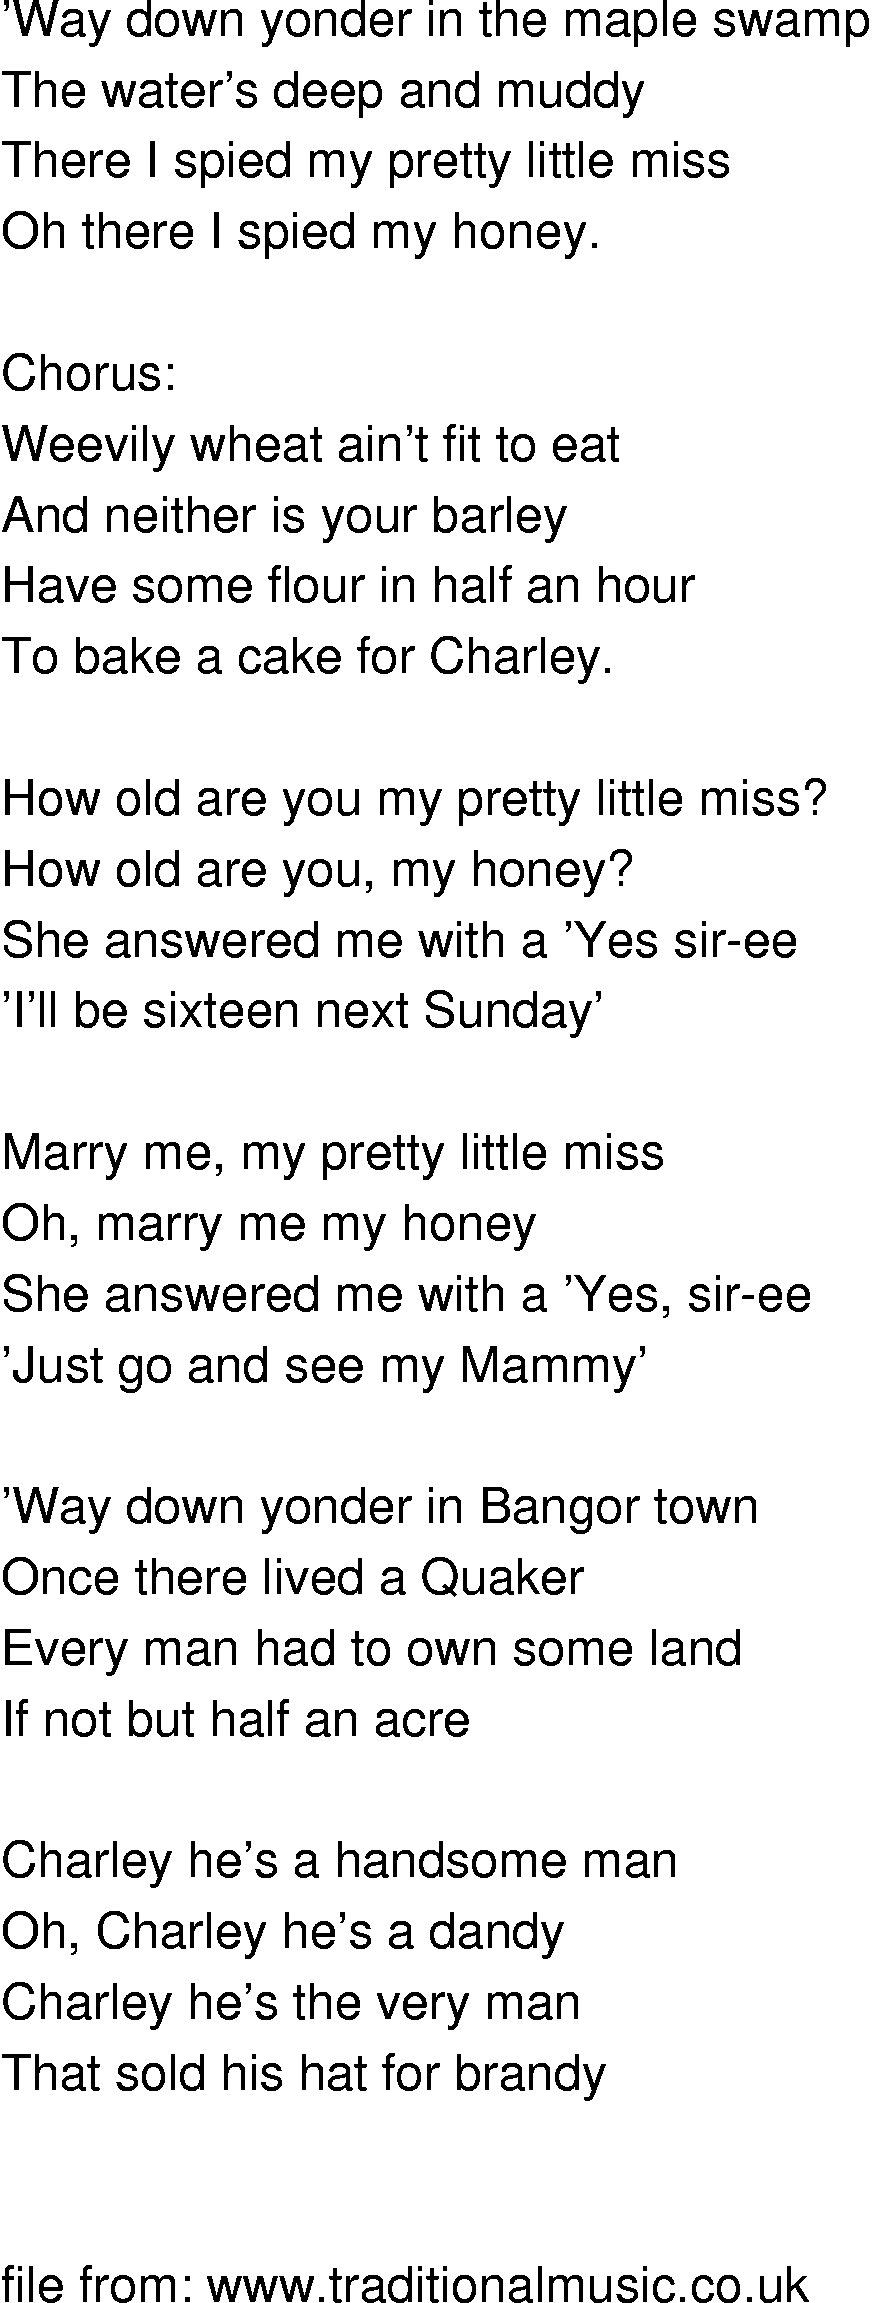 Old-Time (oldtimey) Song Lyrics - weevily wheat